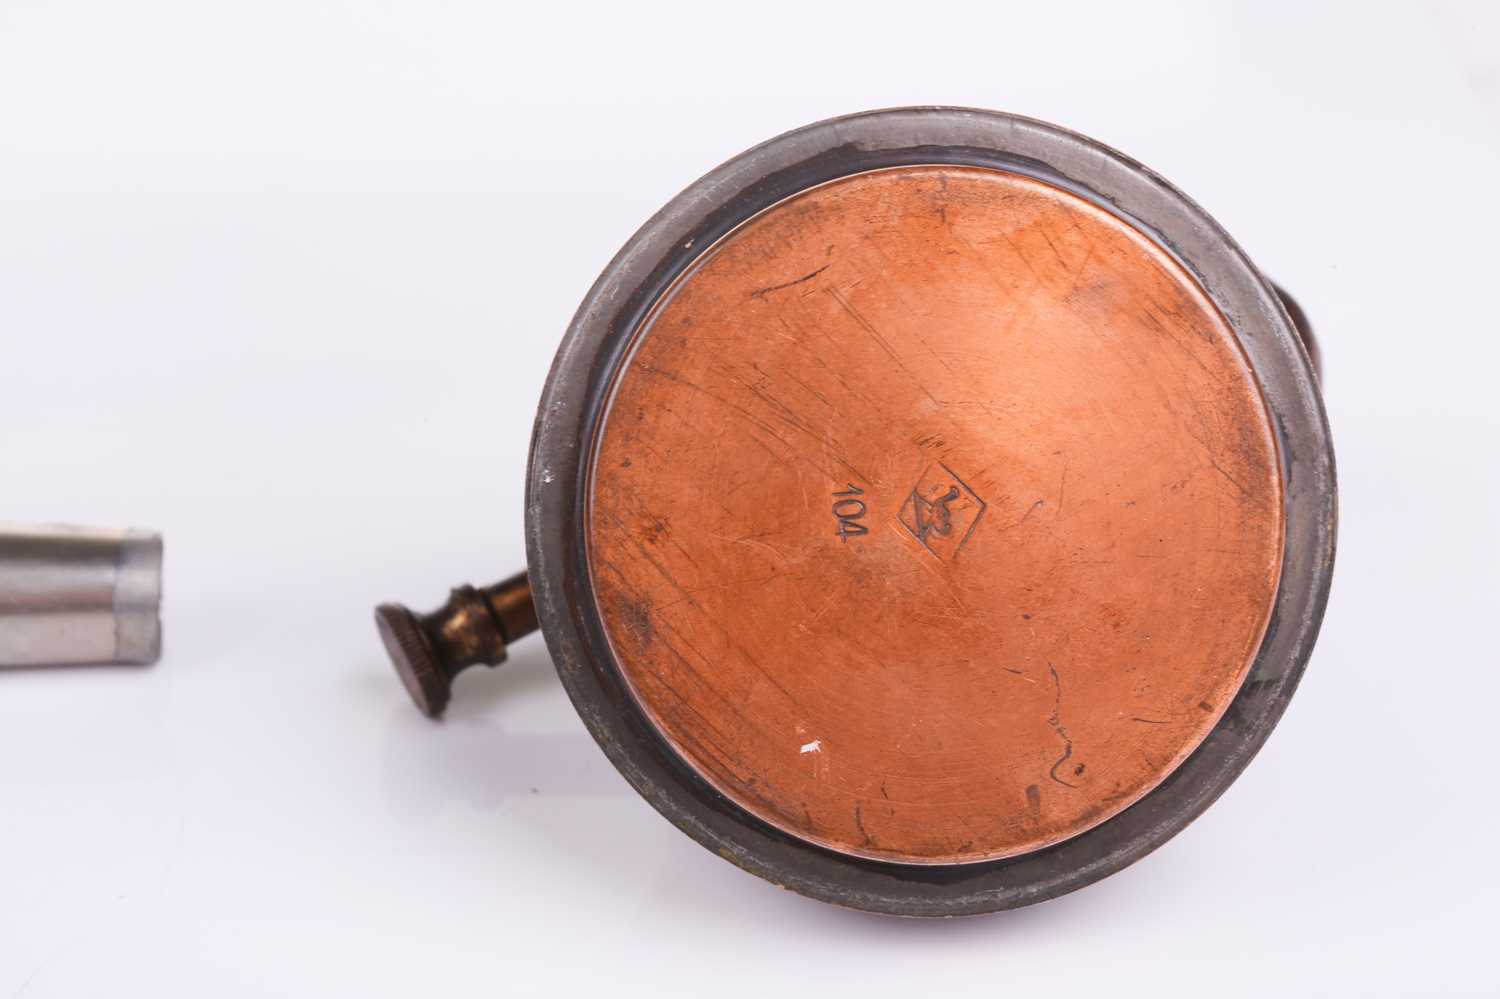 An early 20th century Arts & Crafts style WMF planished copper and brass spirit kettle, burner and - Image 8 of 12